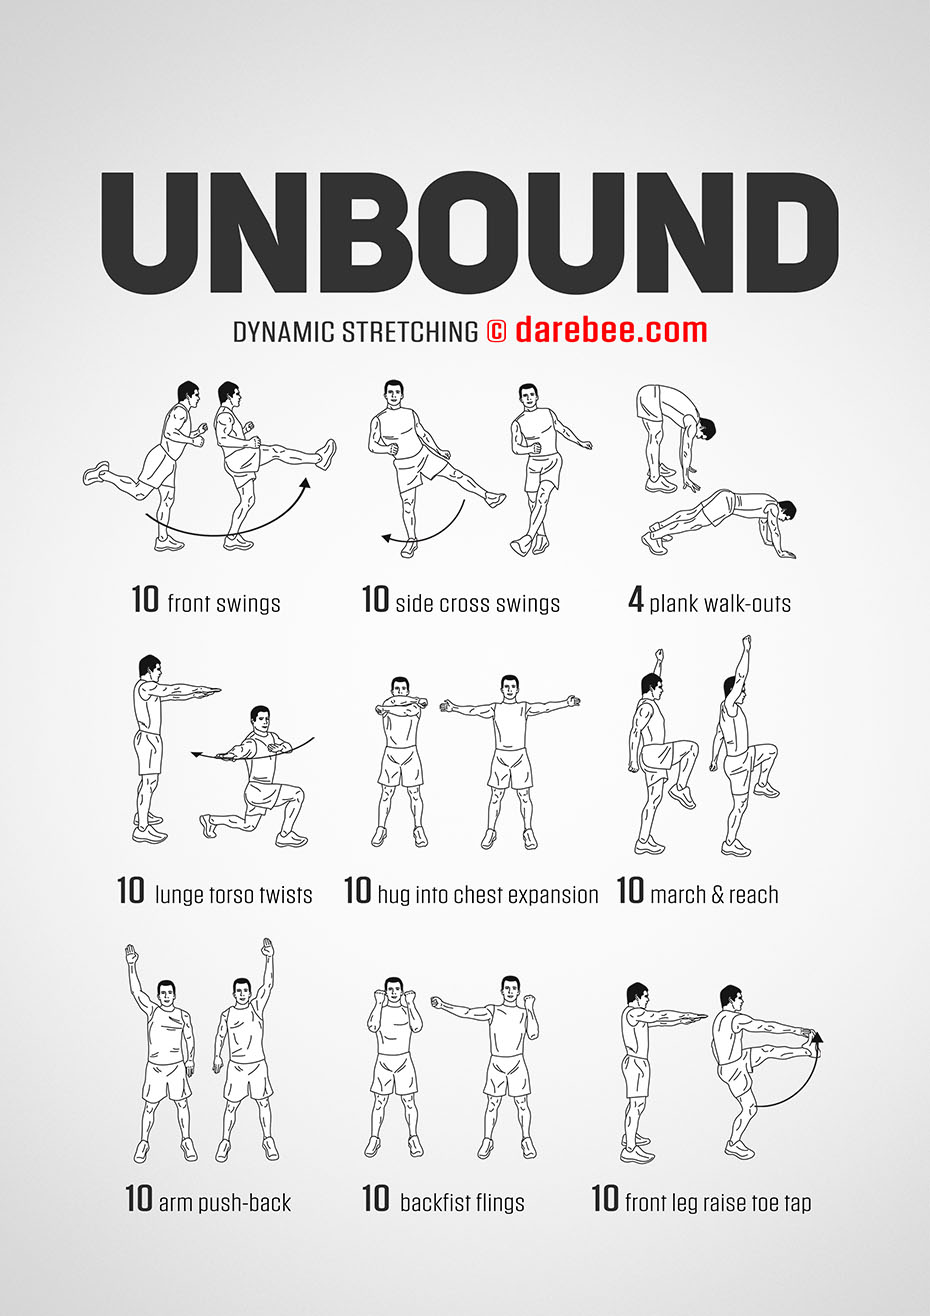 Quick Mobility Workout - #DAREBEE Presents a Mobility Workout That